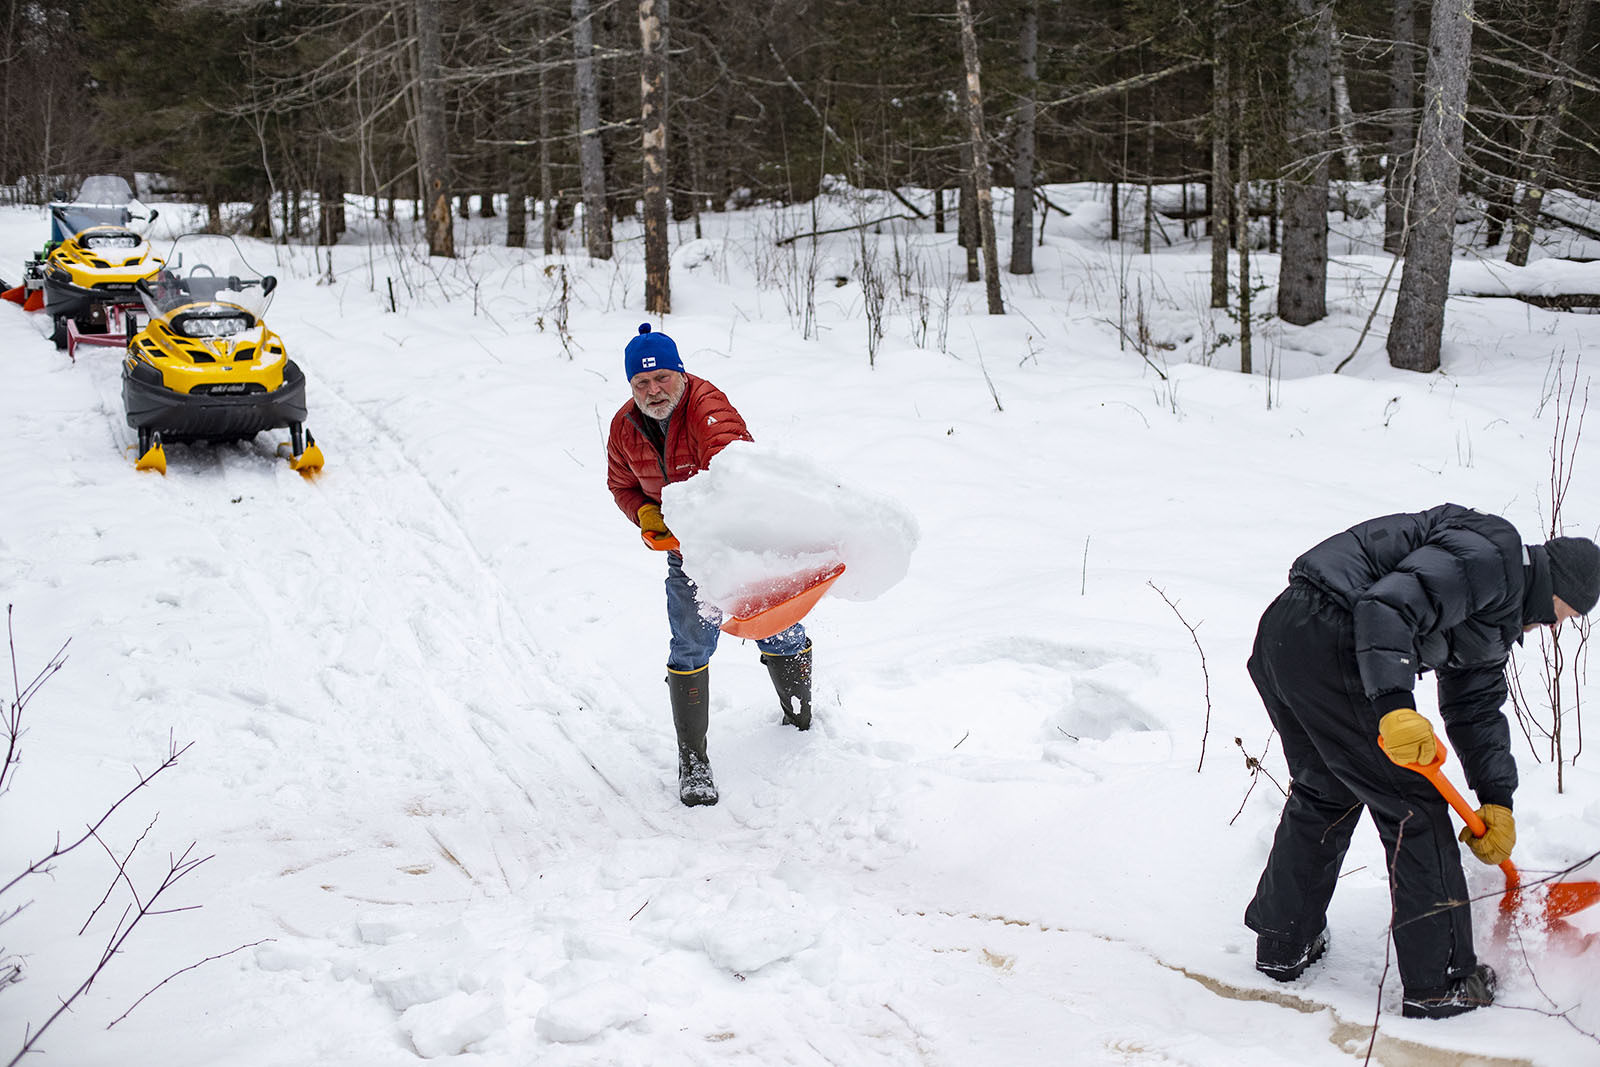 Helmer, left, and another groomer, Craig Brown, shoveled snow to reinforce an icy patch of the ski trail.